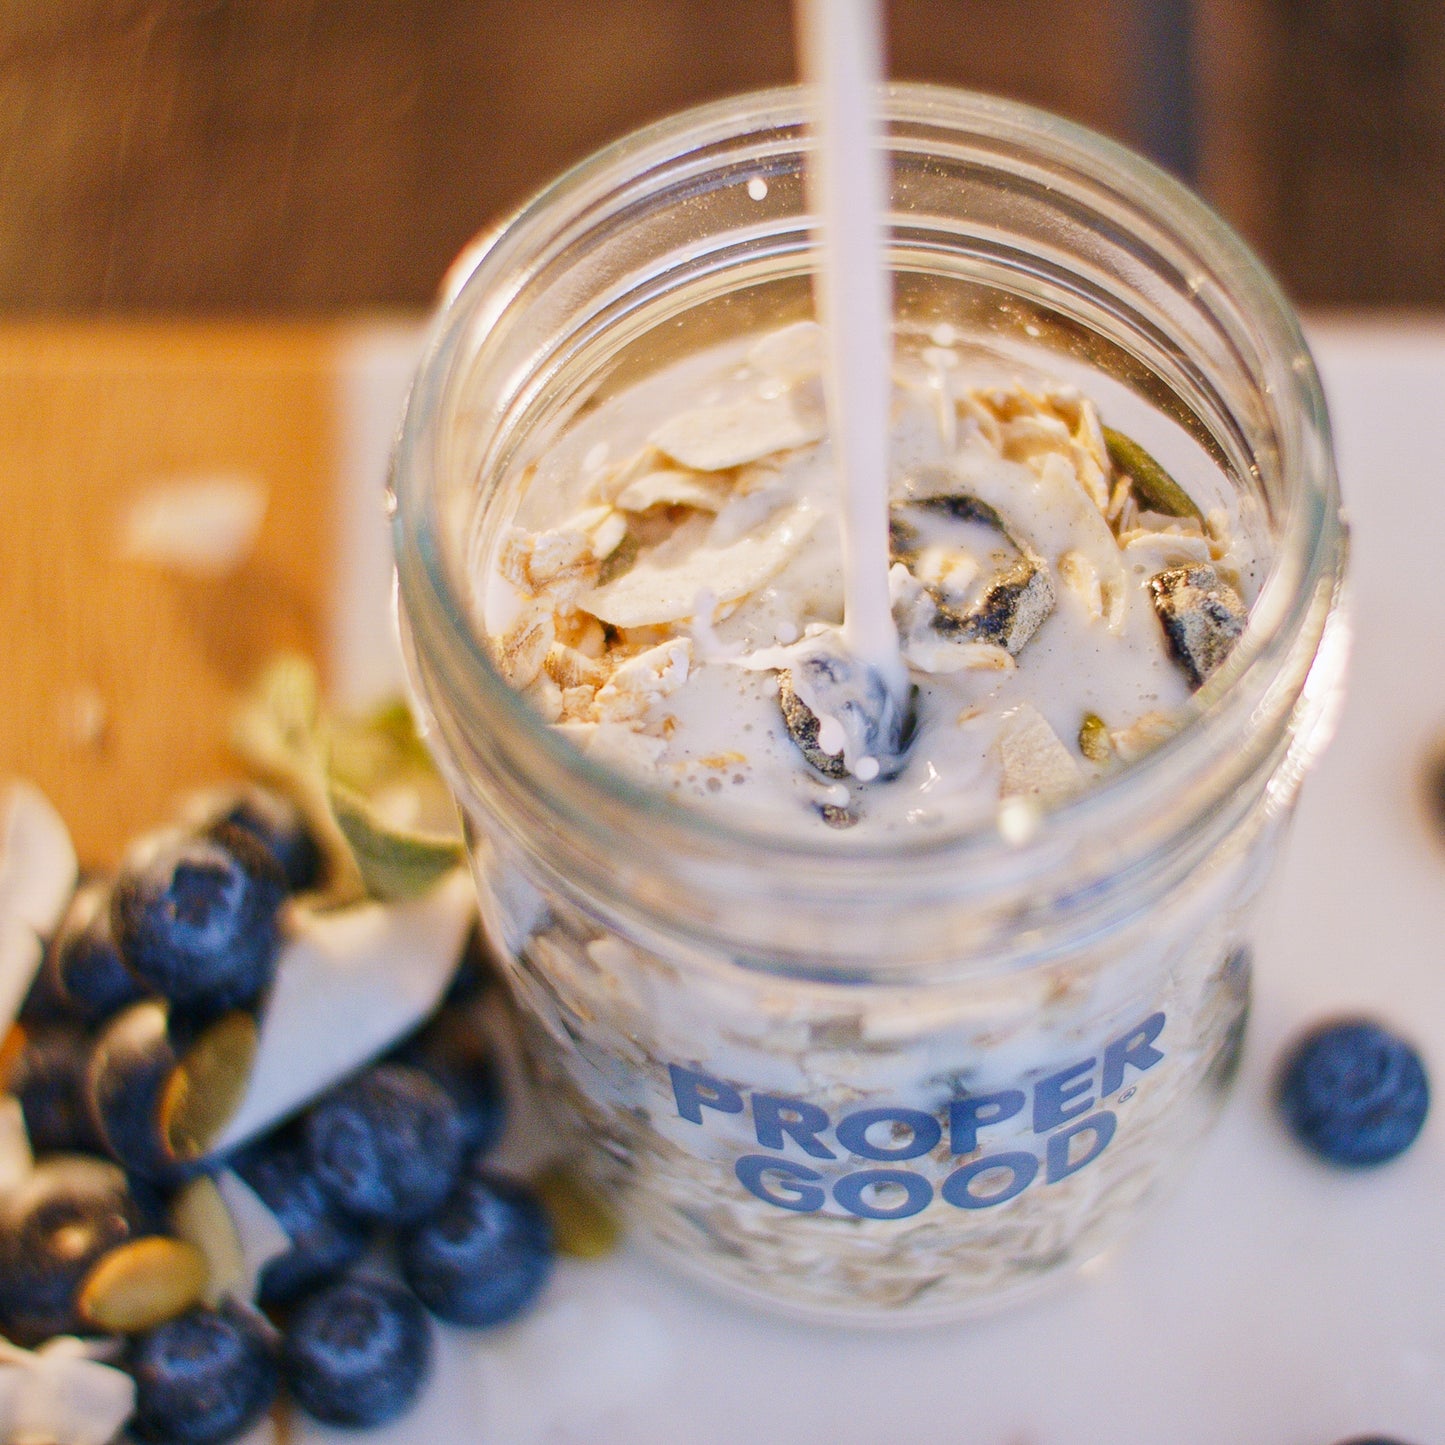 Blueberry Coconut Protein Overnight Oats - Proper Good